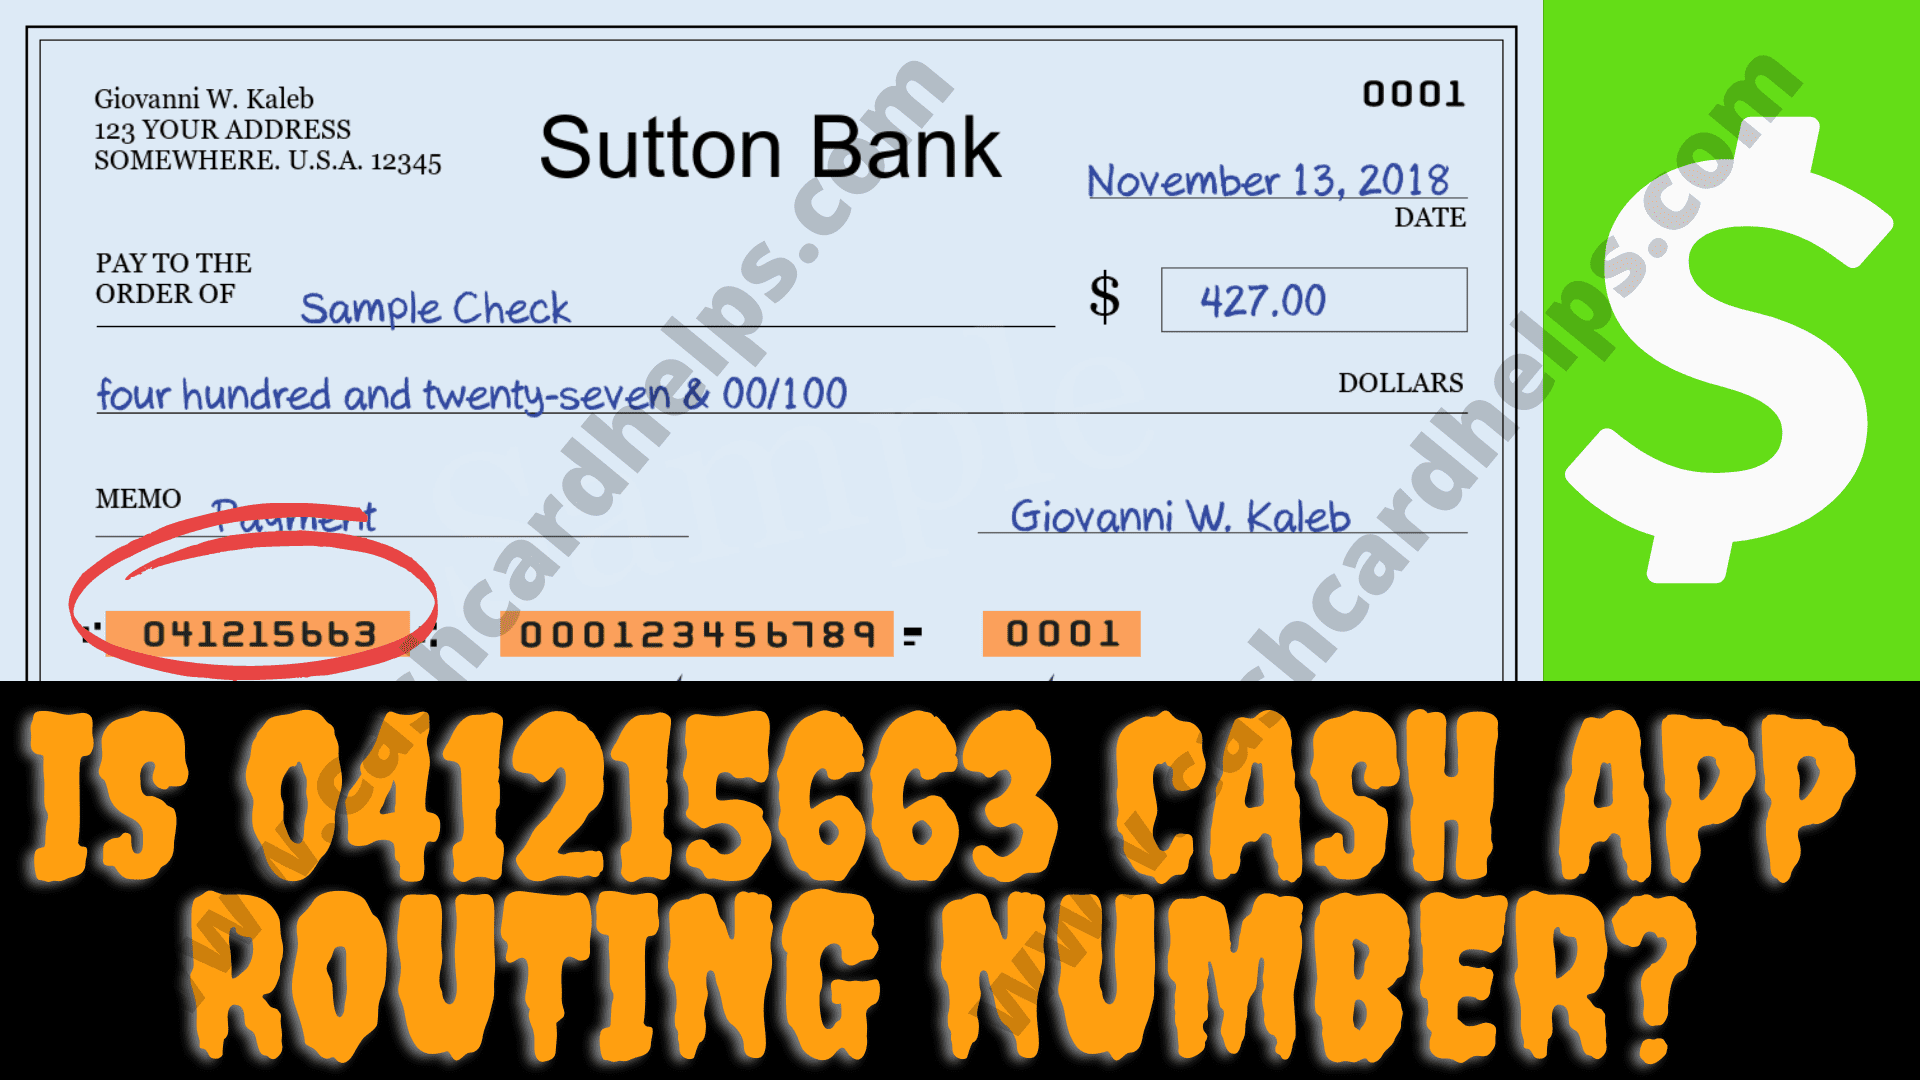 041215663 cash app routing number